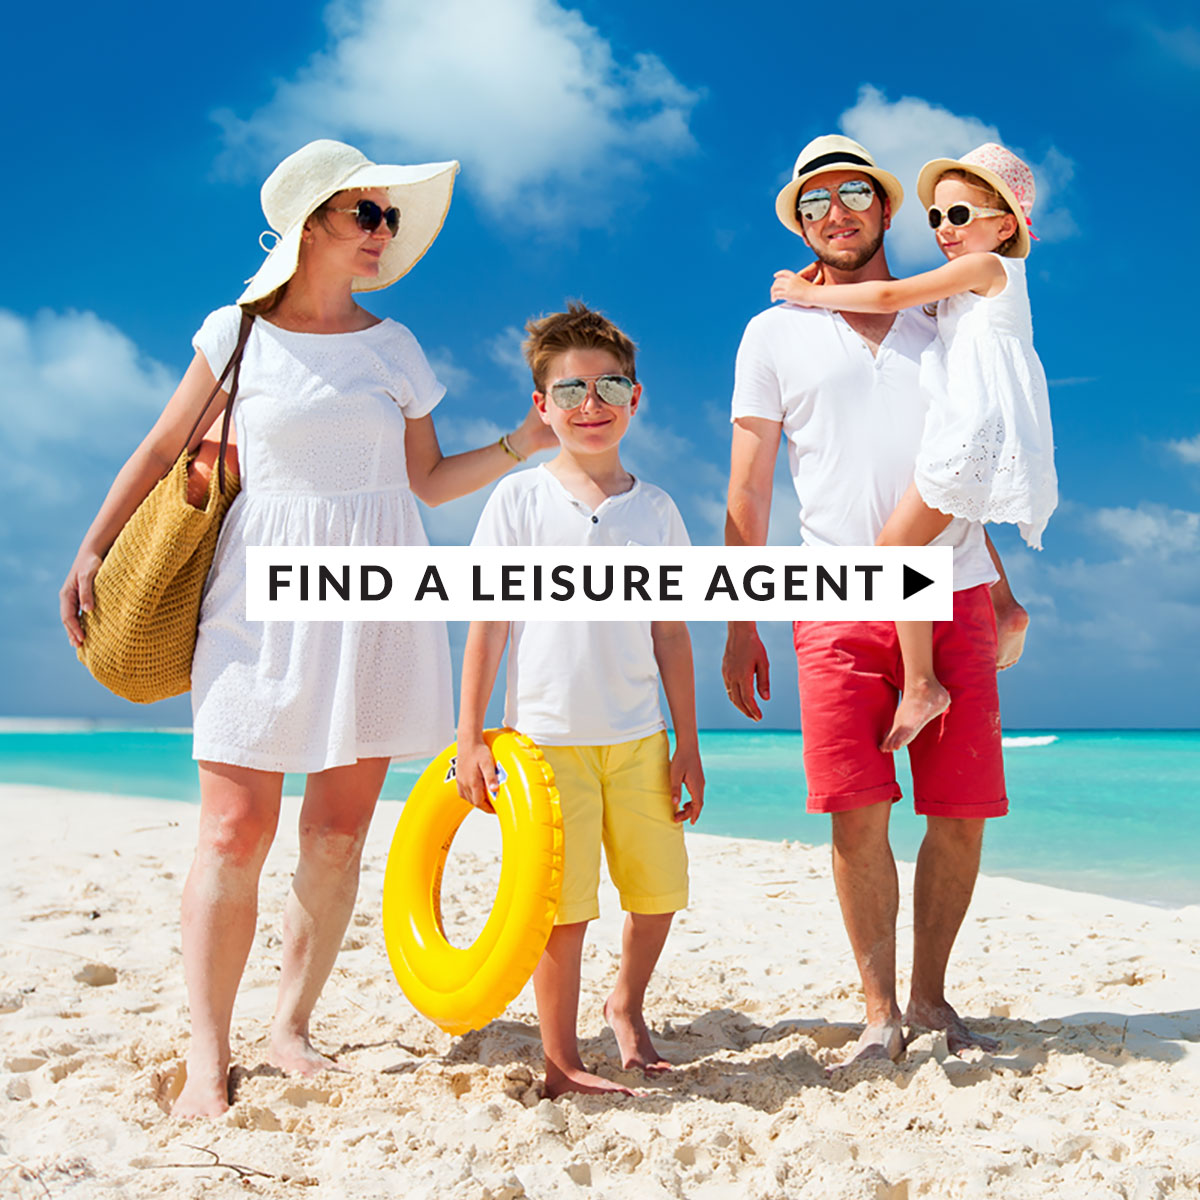 Find a Leisure Agent